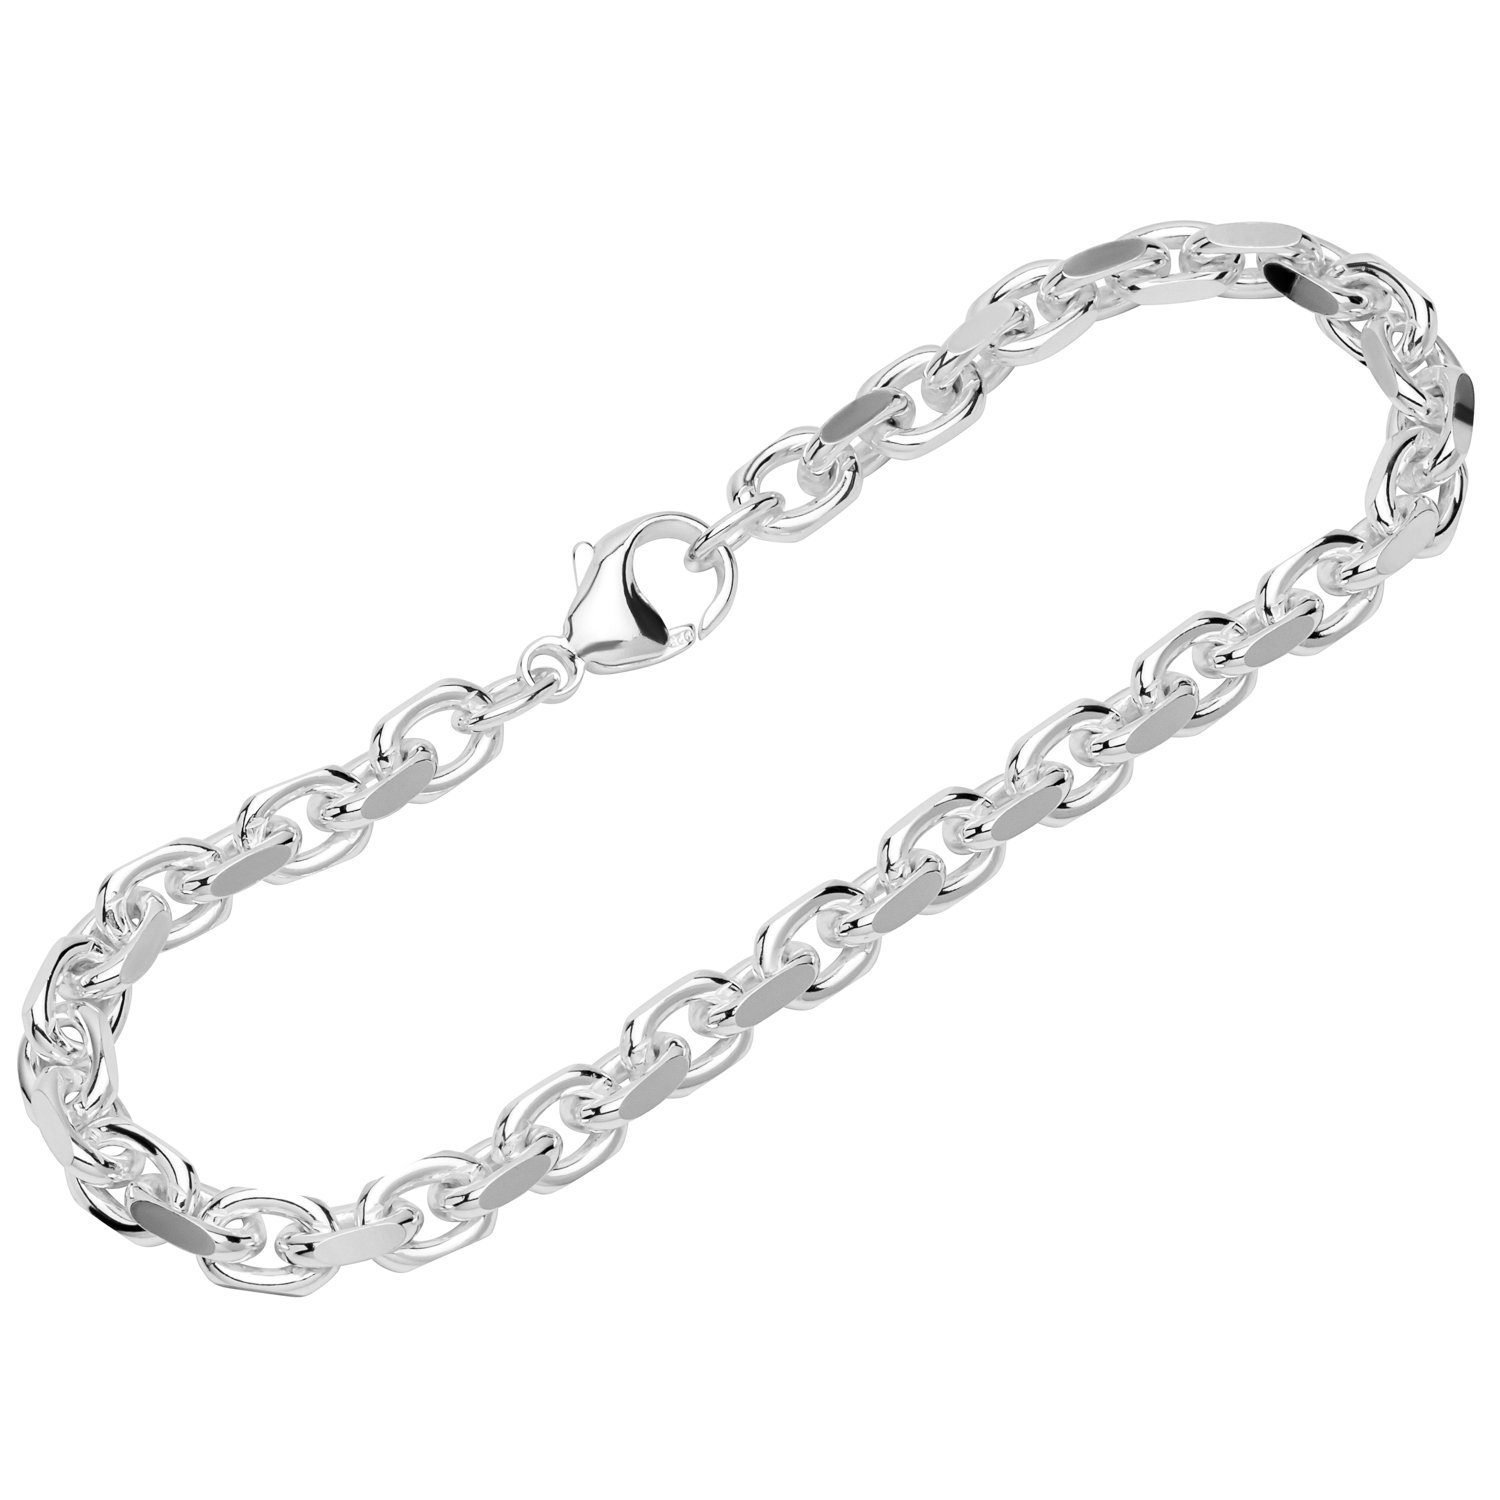 NKlaus Silberarmband Armband 925 Ankerkette Sterling in Stück), 24cm Made seitli Germany (1 Silber